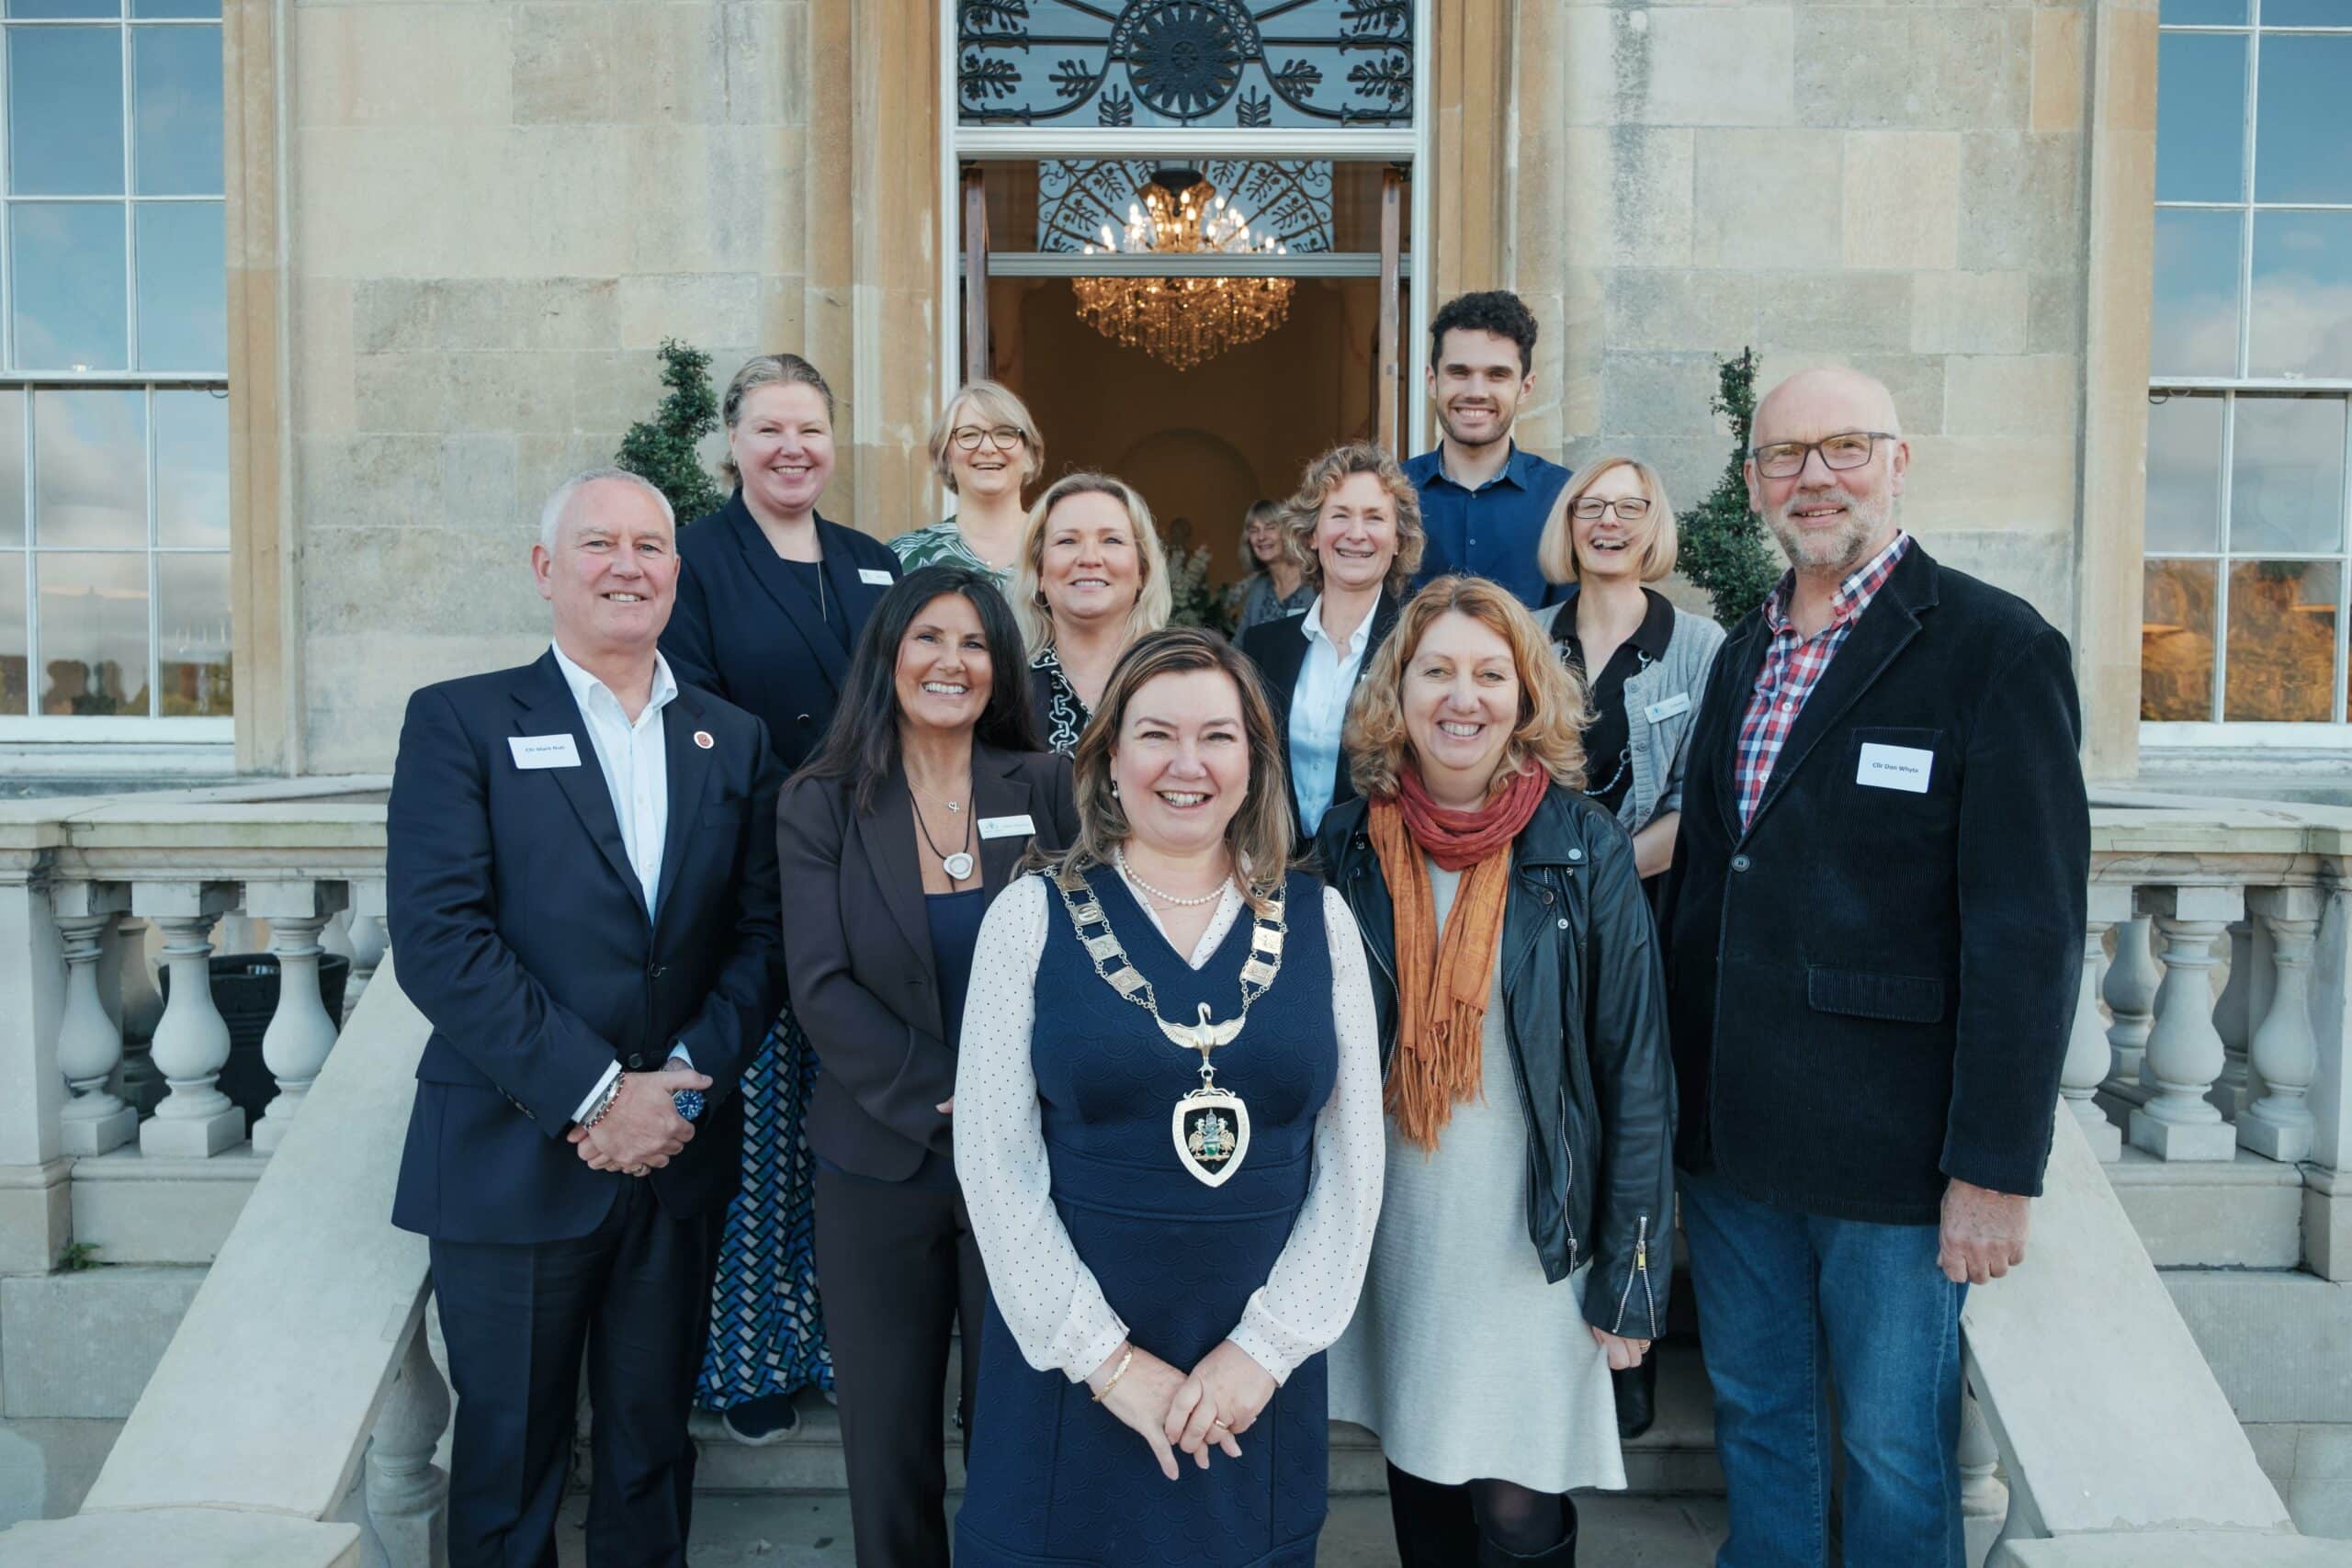 VSNS team and chair with the mayor of Runnymede on the steps of Botley's Mansion